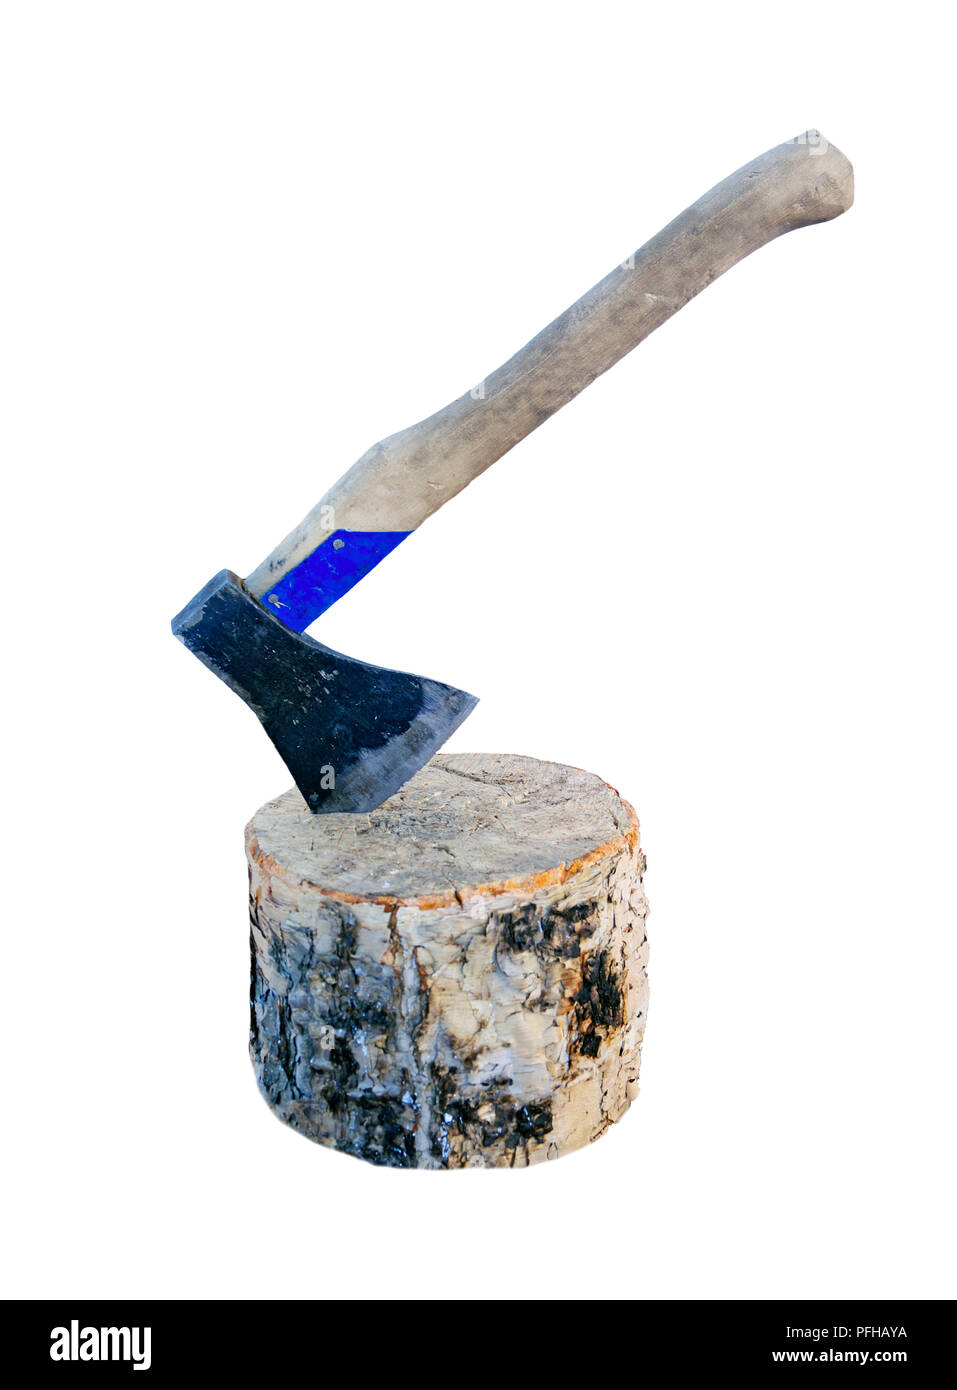 Isolated image of an old ax in a wooden chock Stock Photo